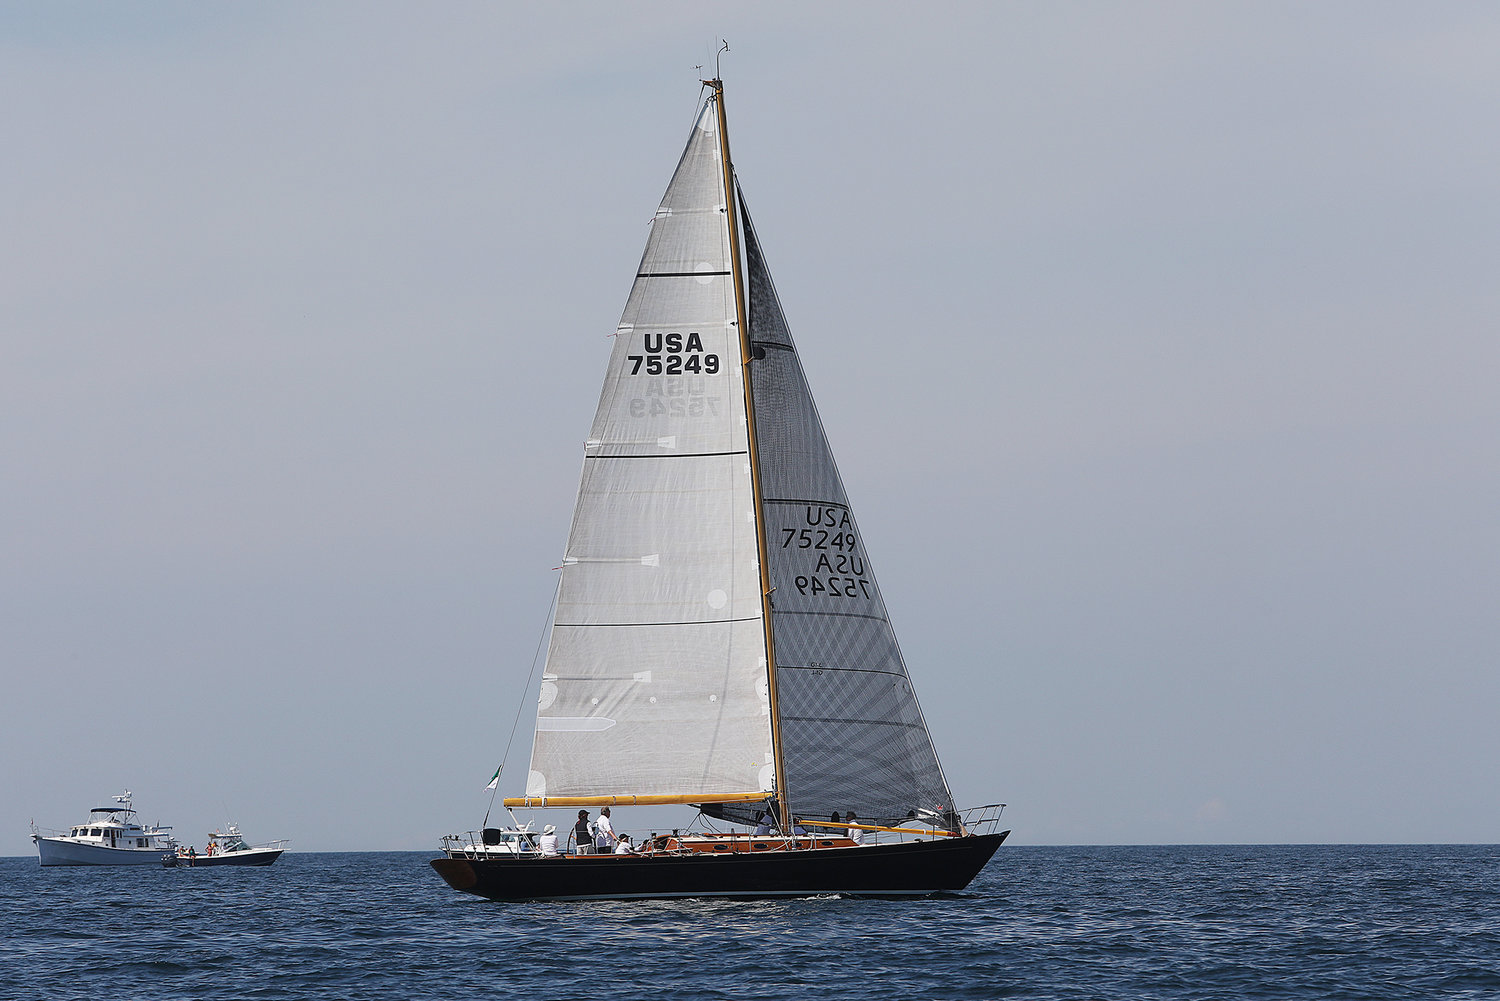 Blackfish during the Opera House Cup race on Sunday in Nantucket Sound.